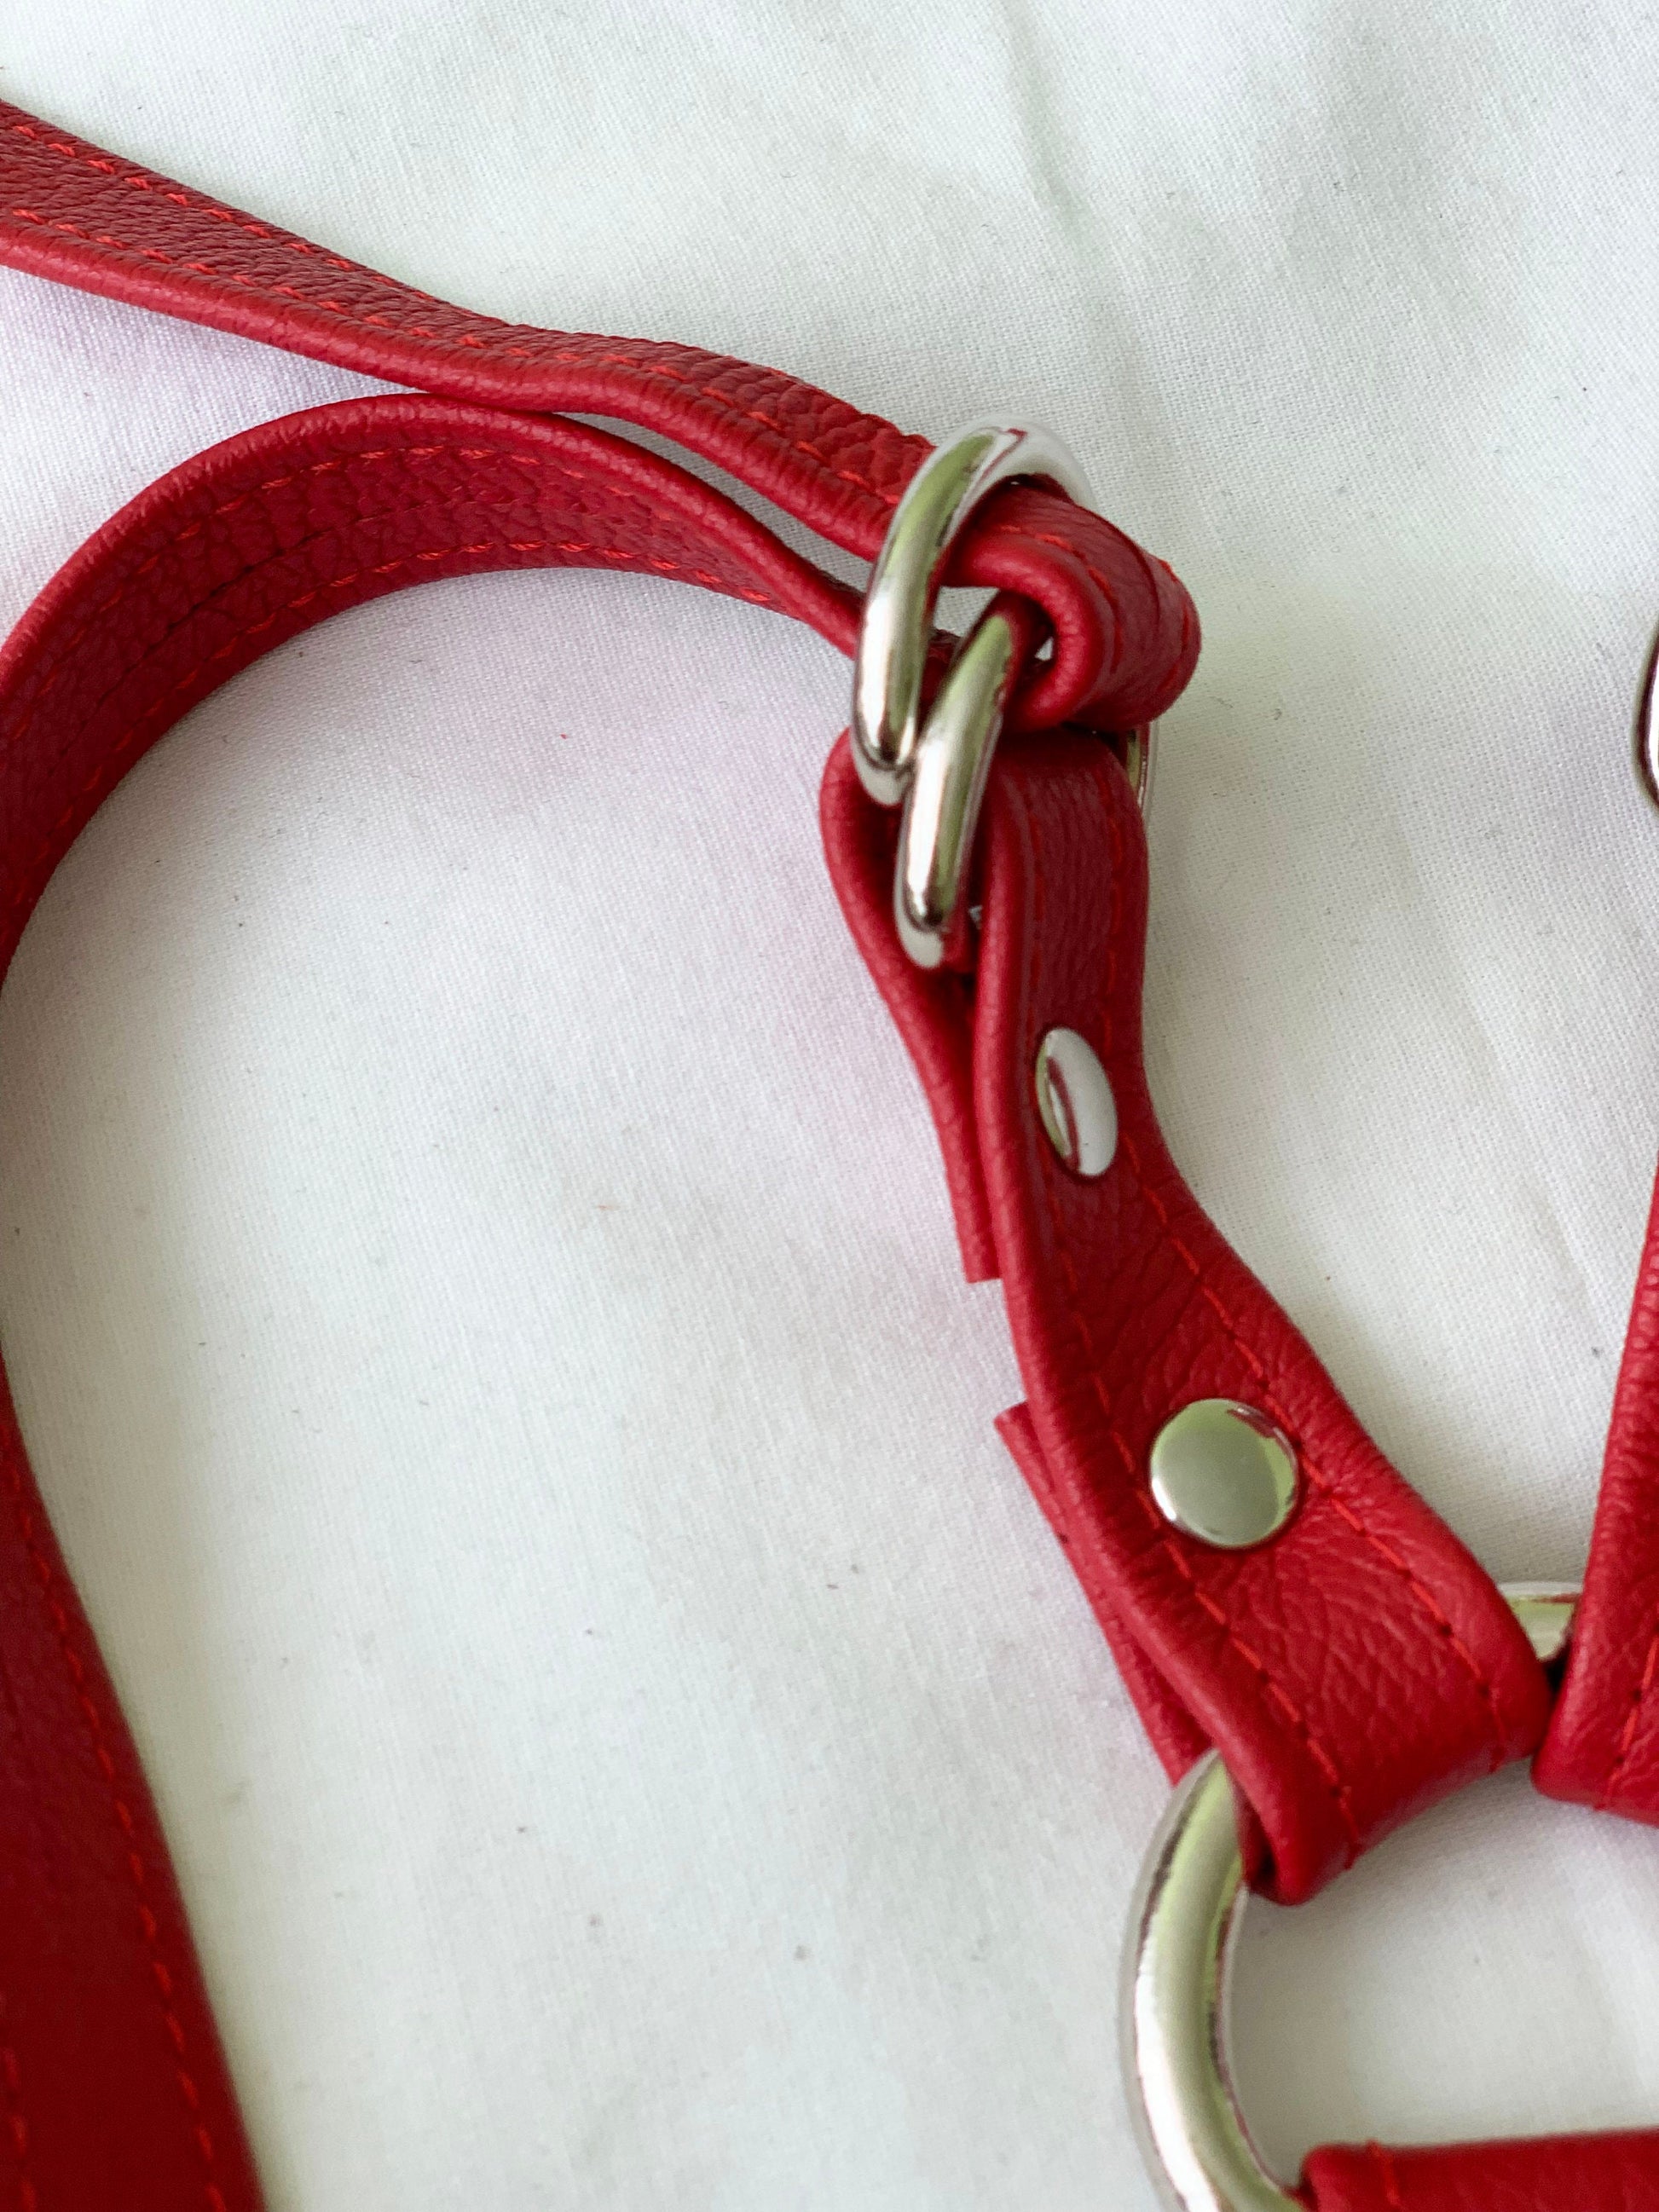 red leather thigh strapon harness closeup with 2 d rings